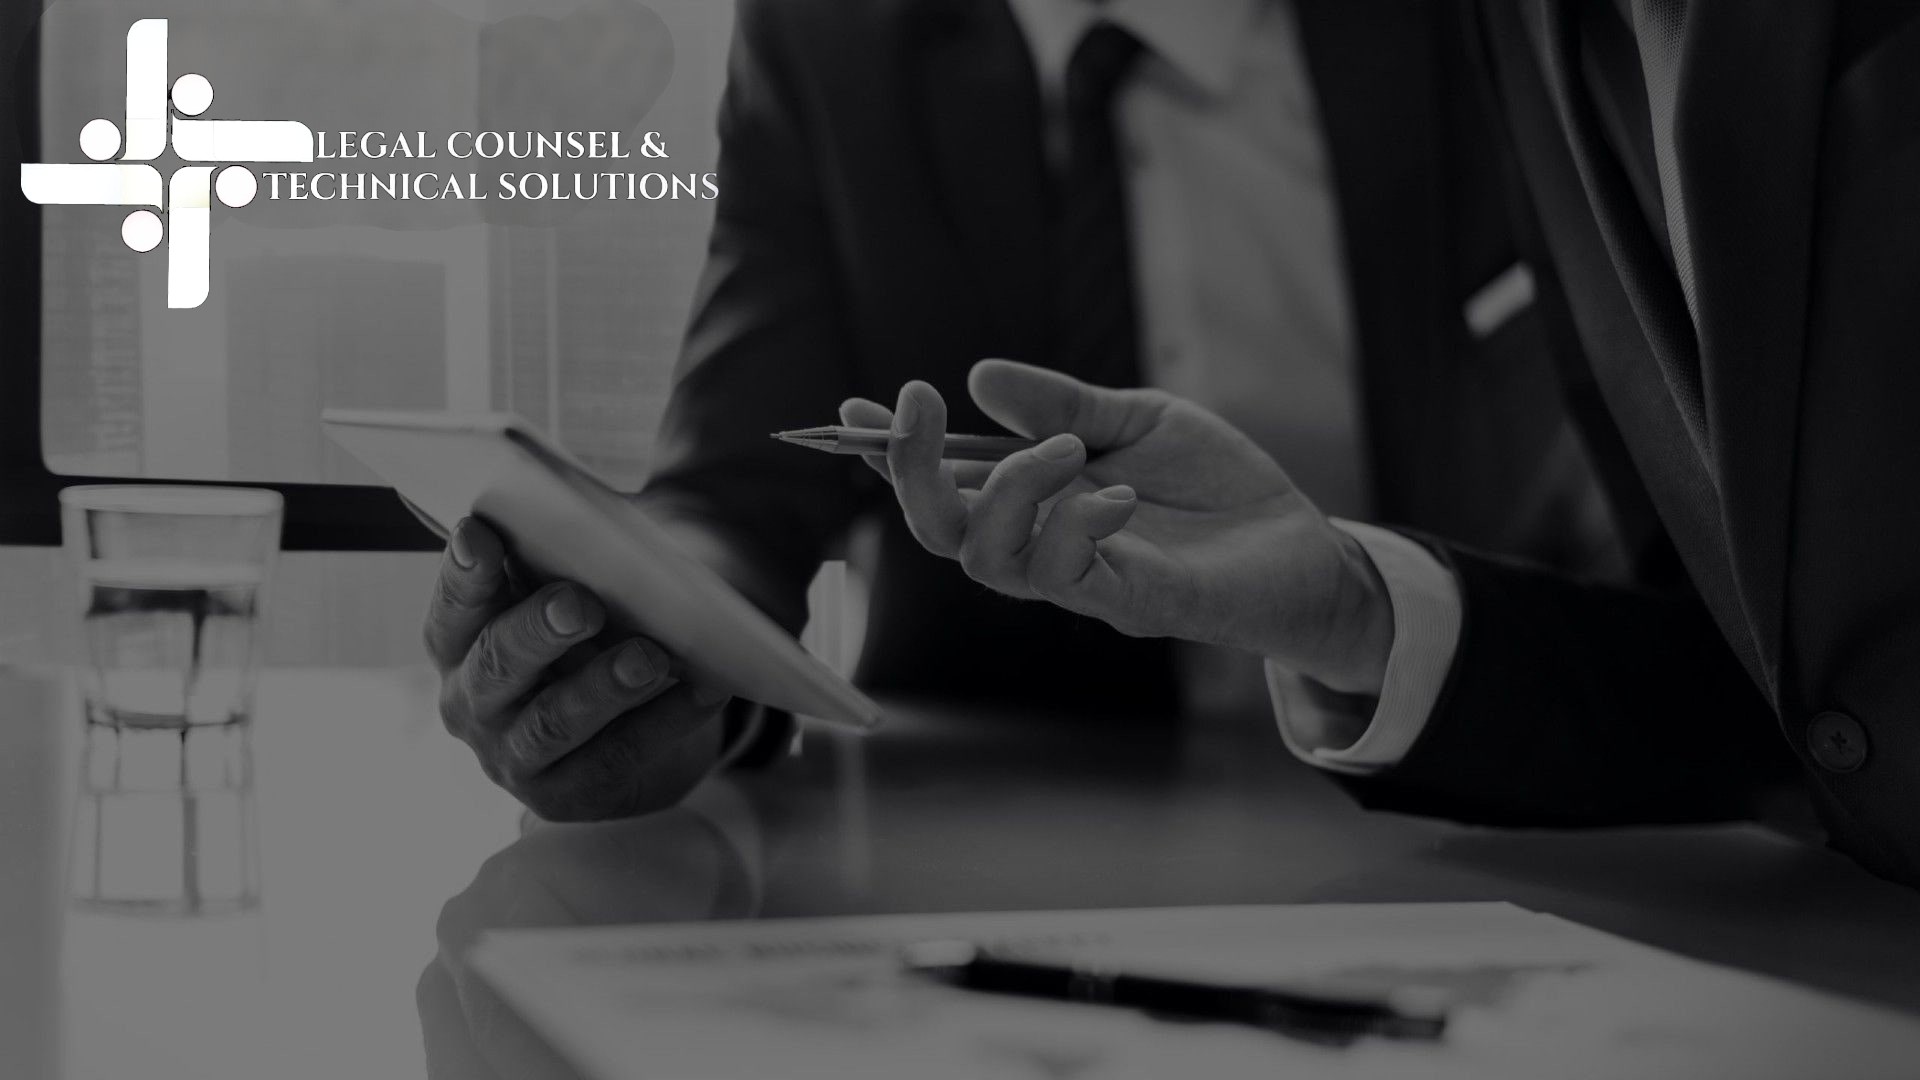 Servicios Legal Counsel & Technical Solutions